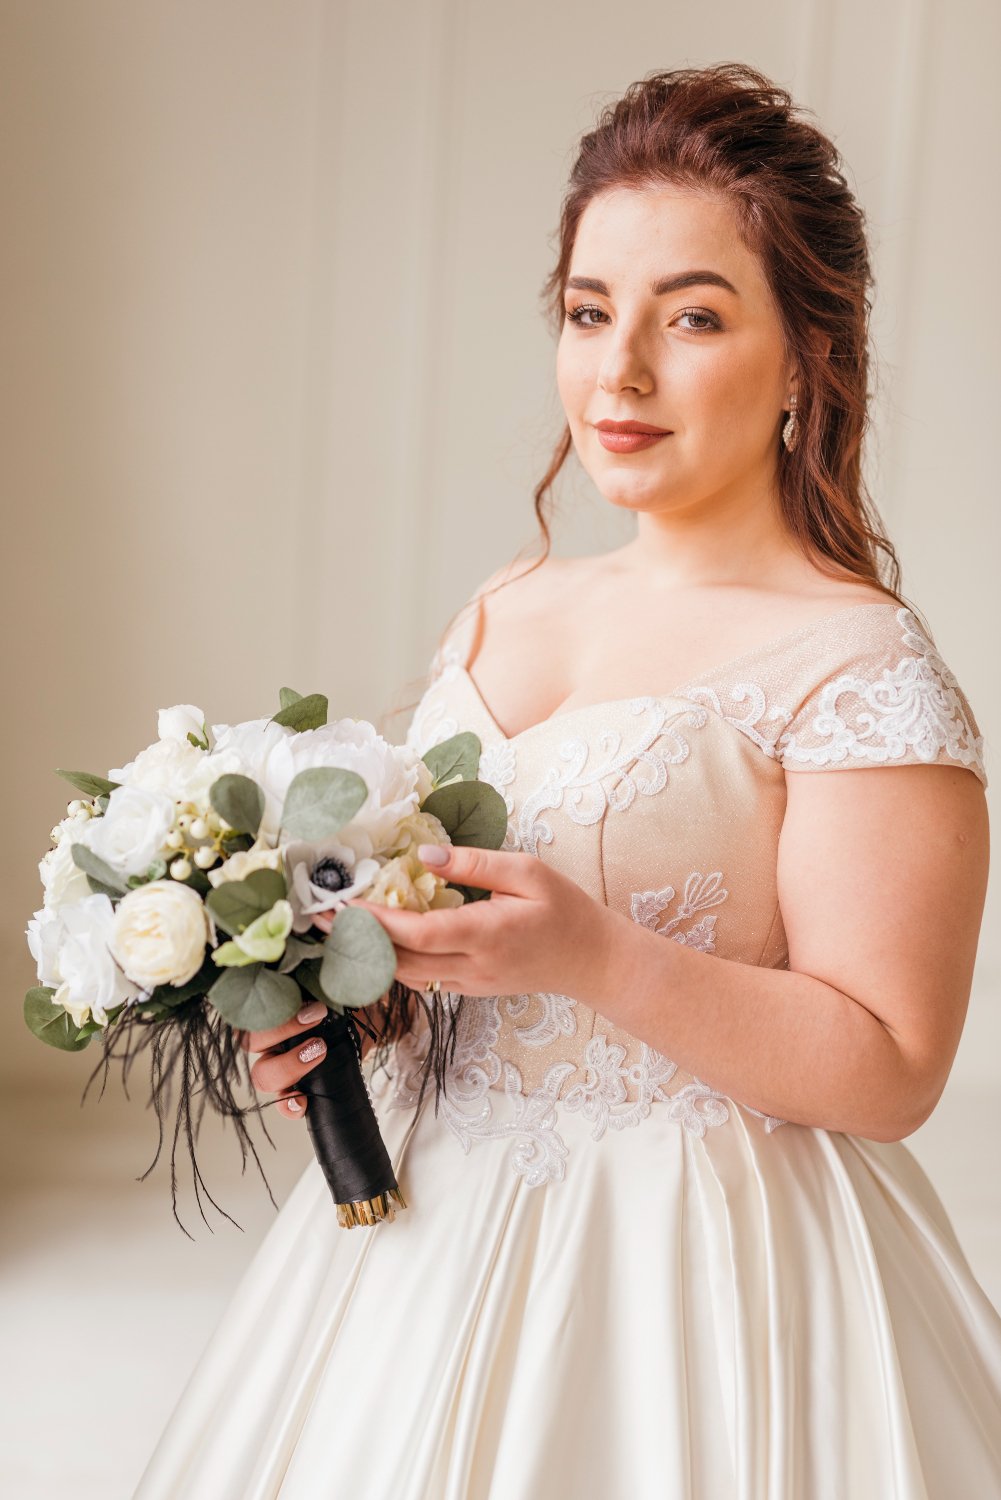 photo bride with bouquet of flowers